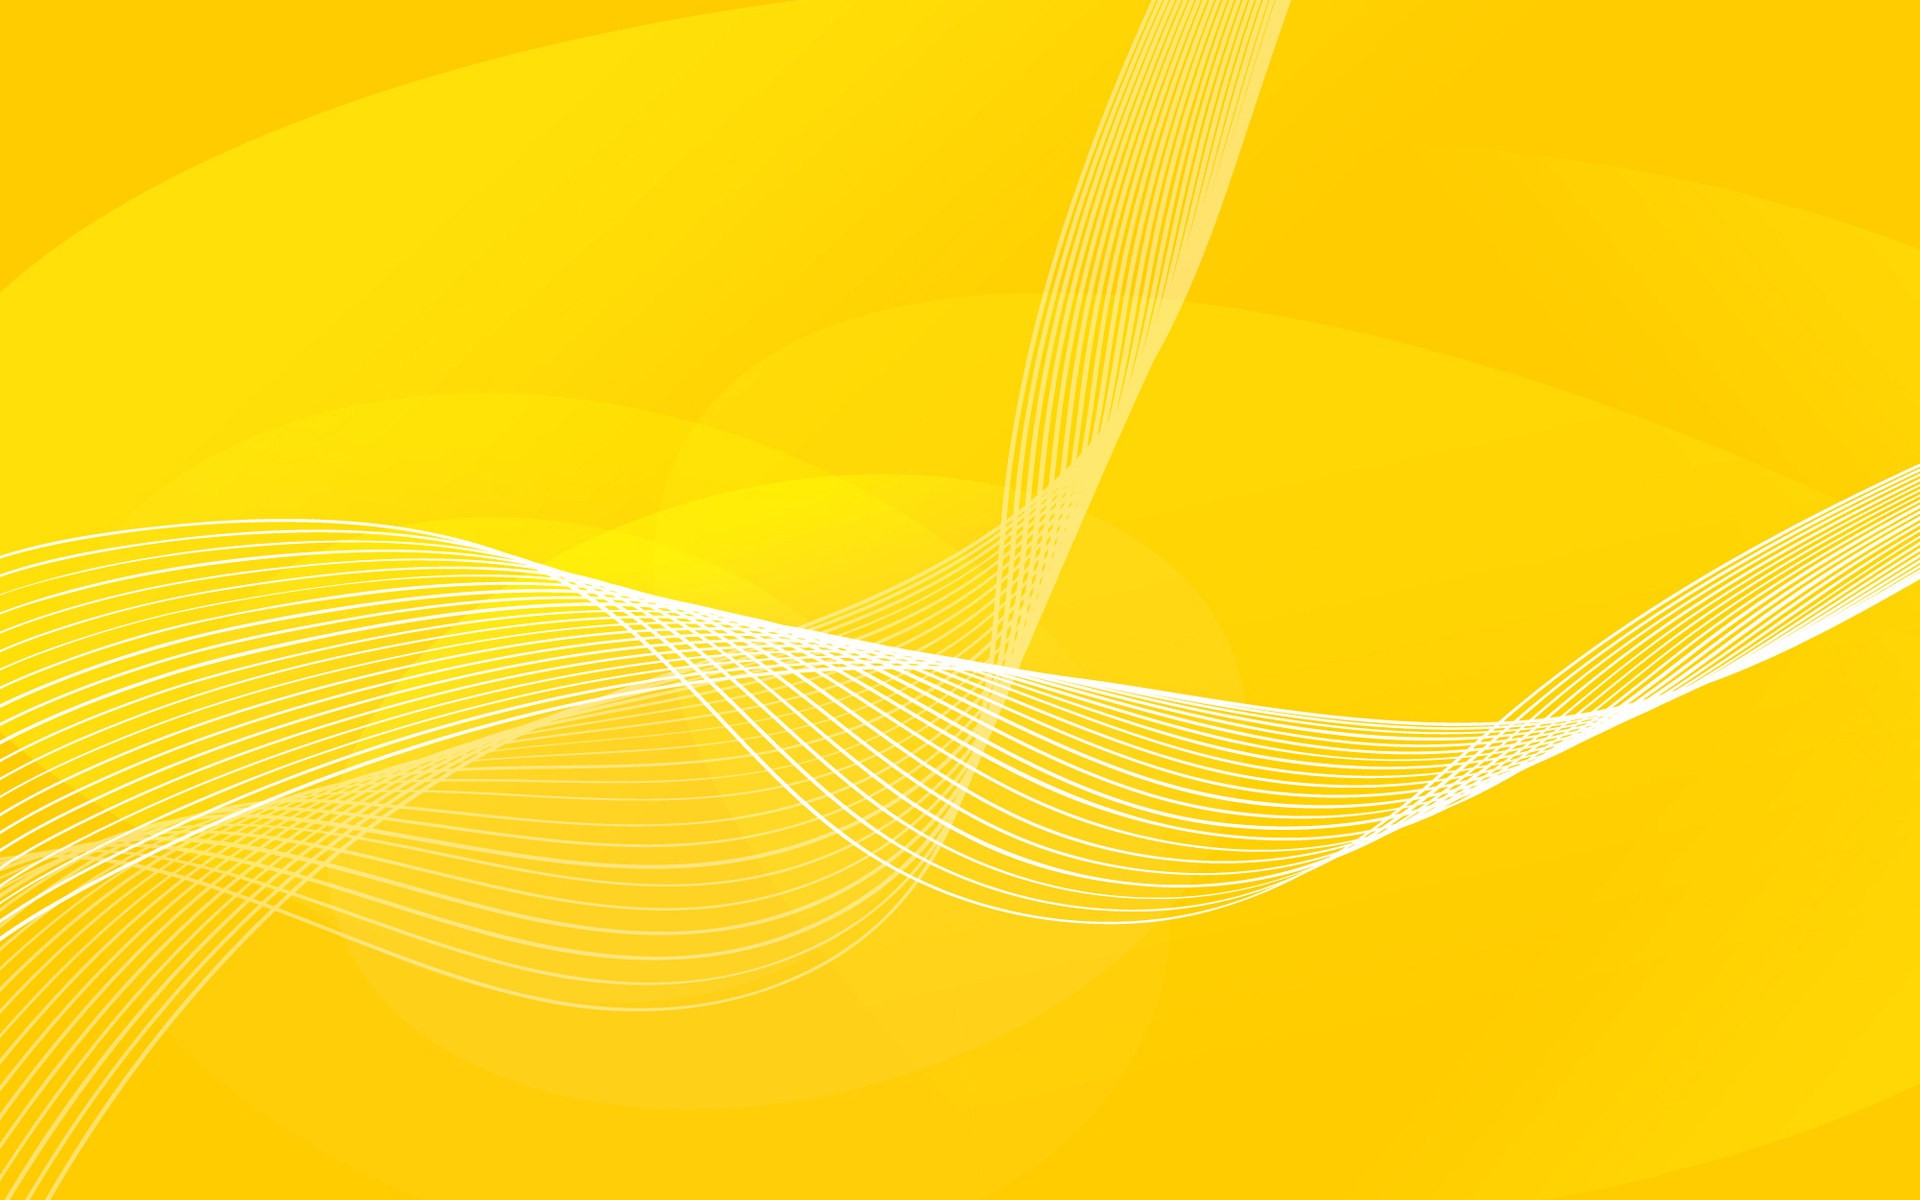 On Yellow Background Wallpaper HD High Resolution